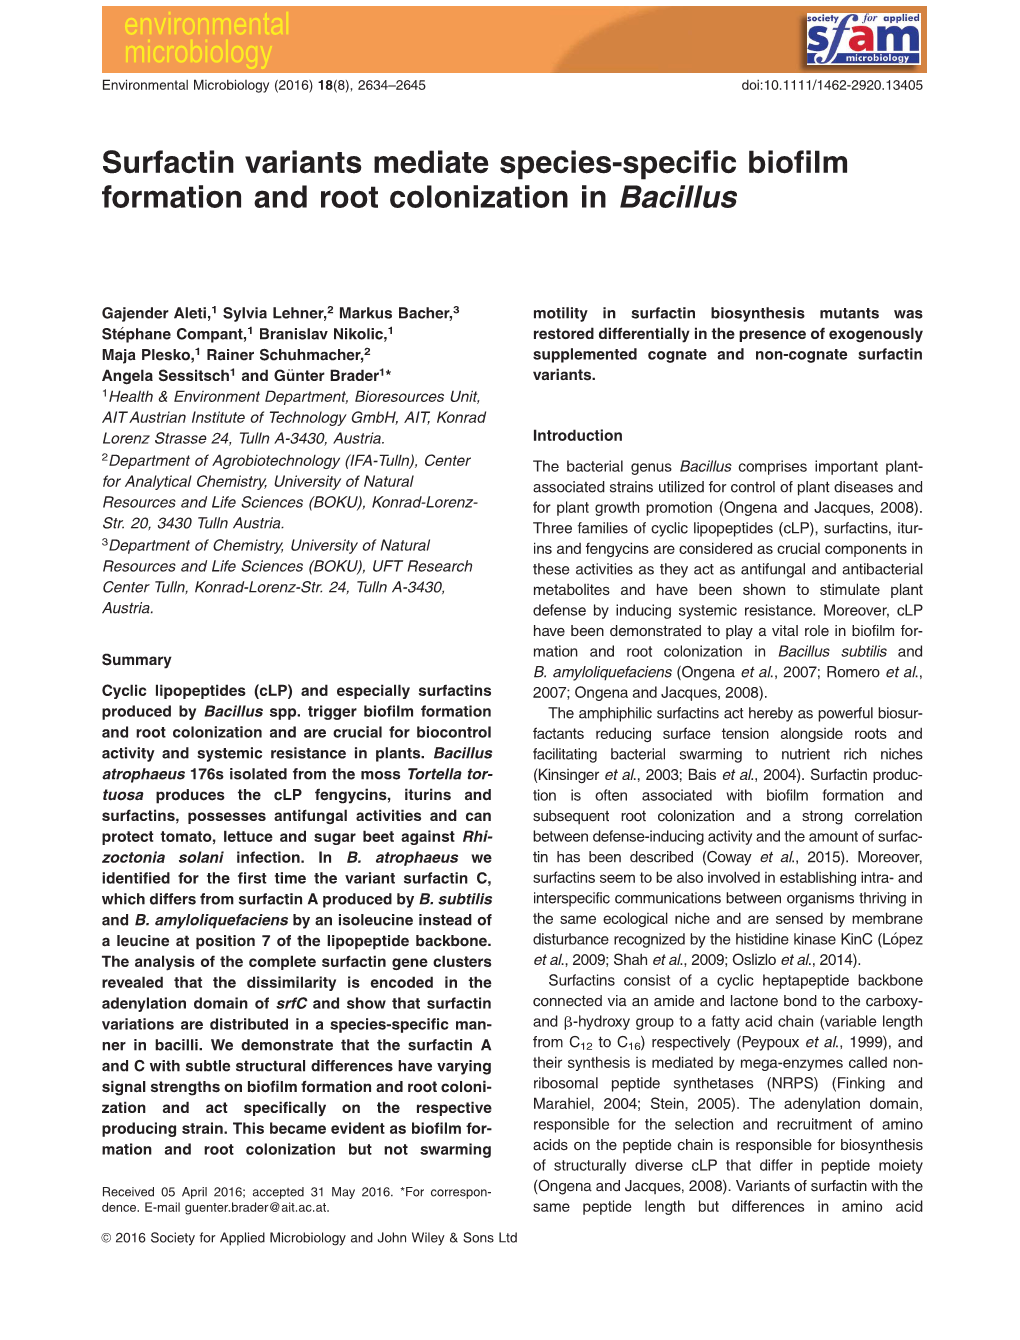 Surfactin Variants Mediate Species‐Specific Biofilm Formation and Root Colonization in Bacillus